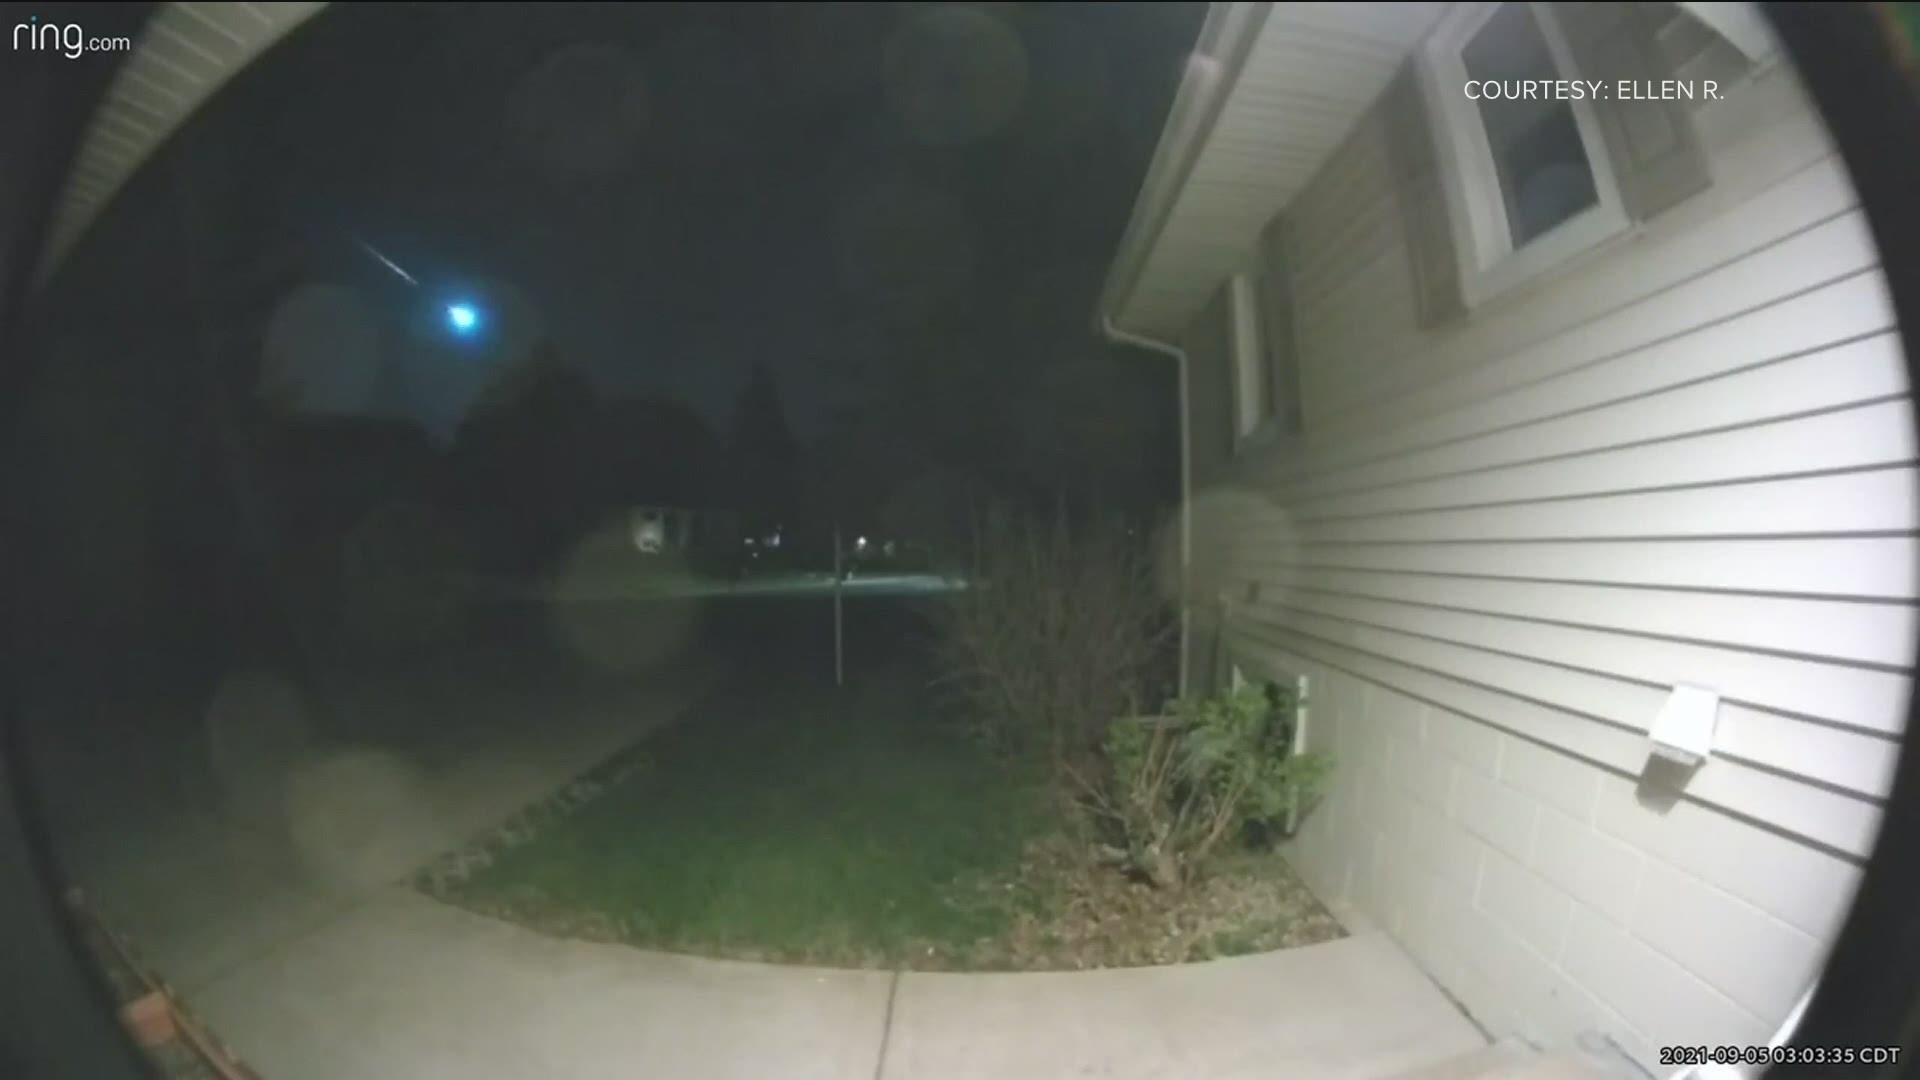 Most folks across Minnesota were sleeping at 3 a.m. Sunday, but security cameras were not, and some captured what appears to be a meteor streaking across the sky.